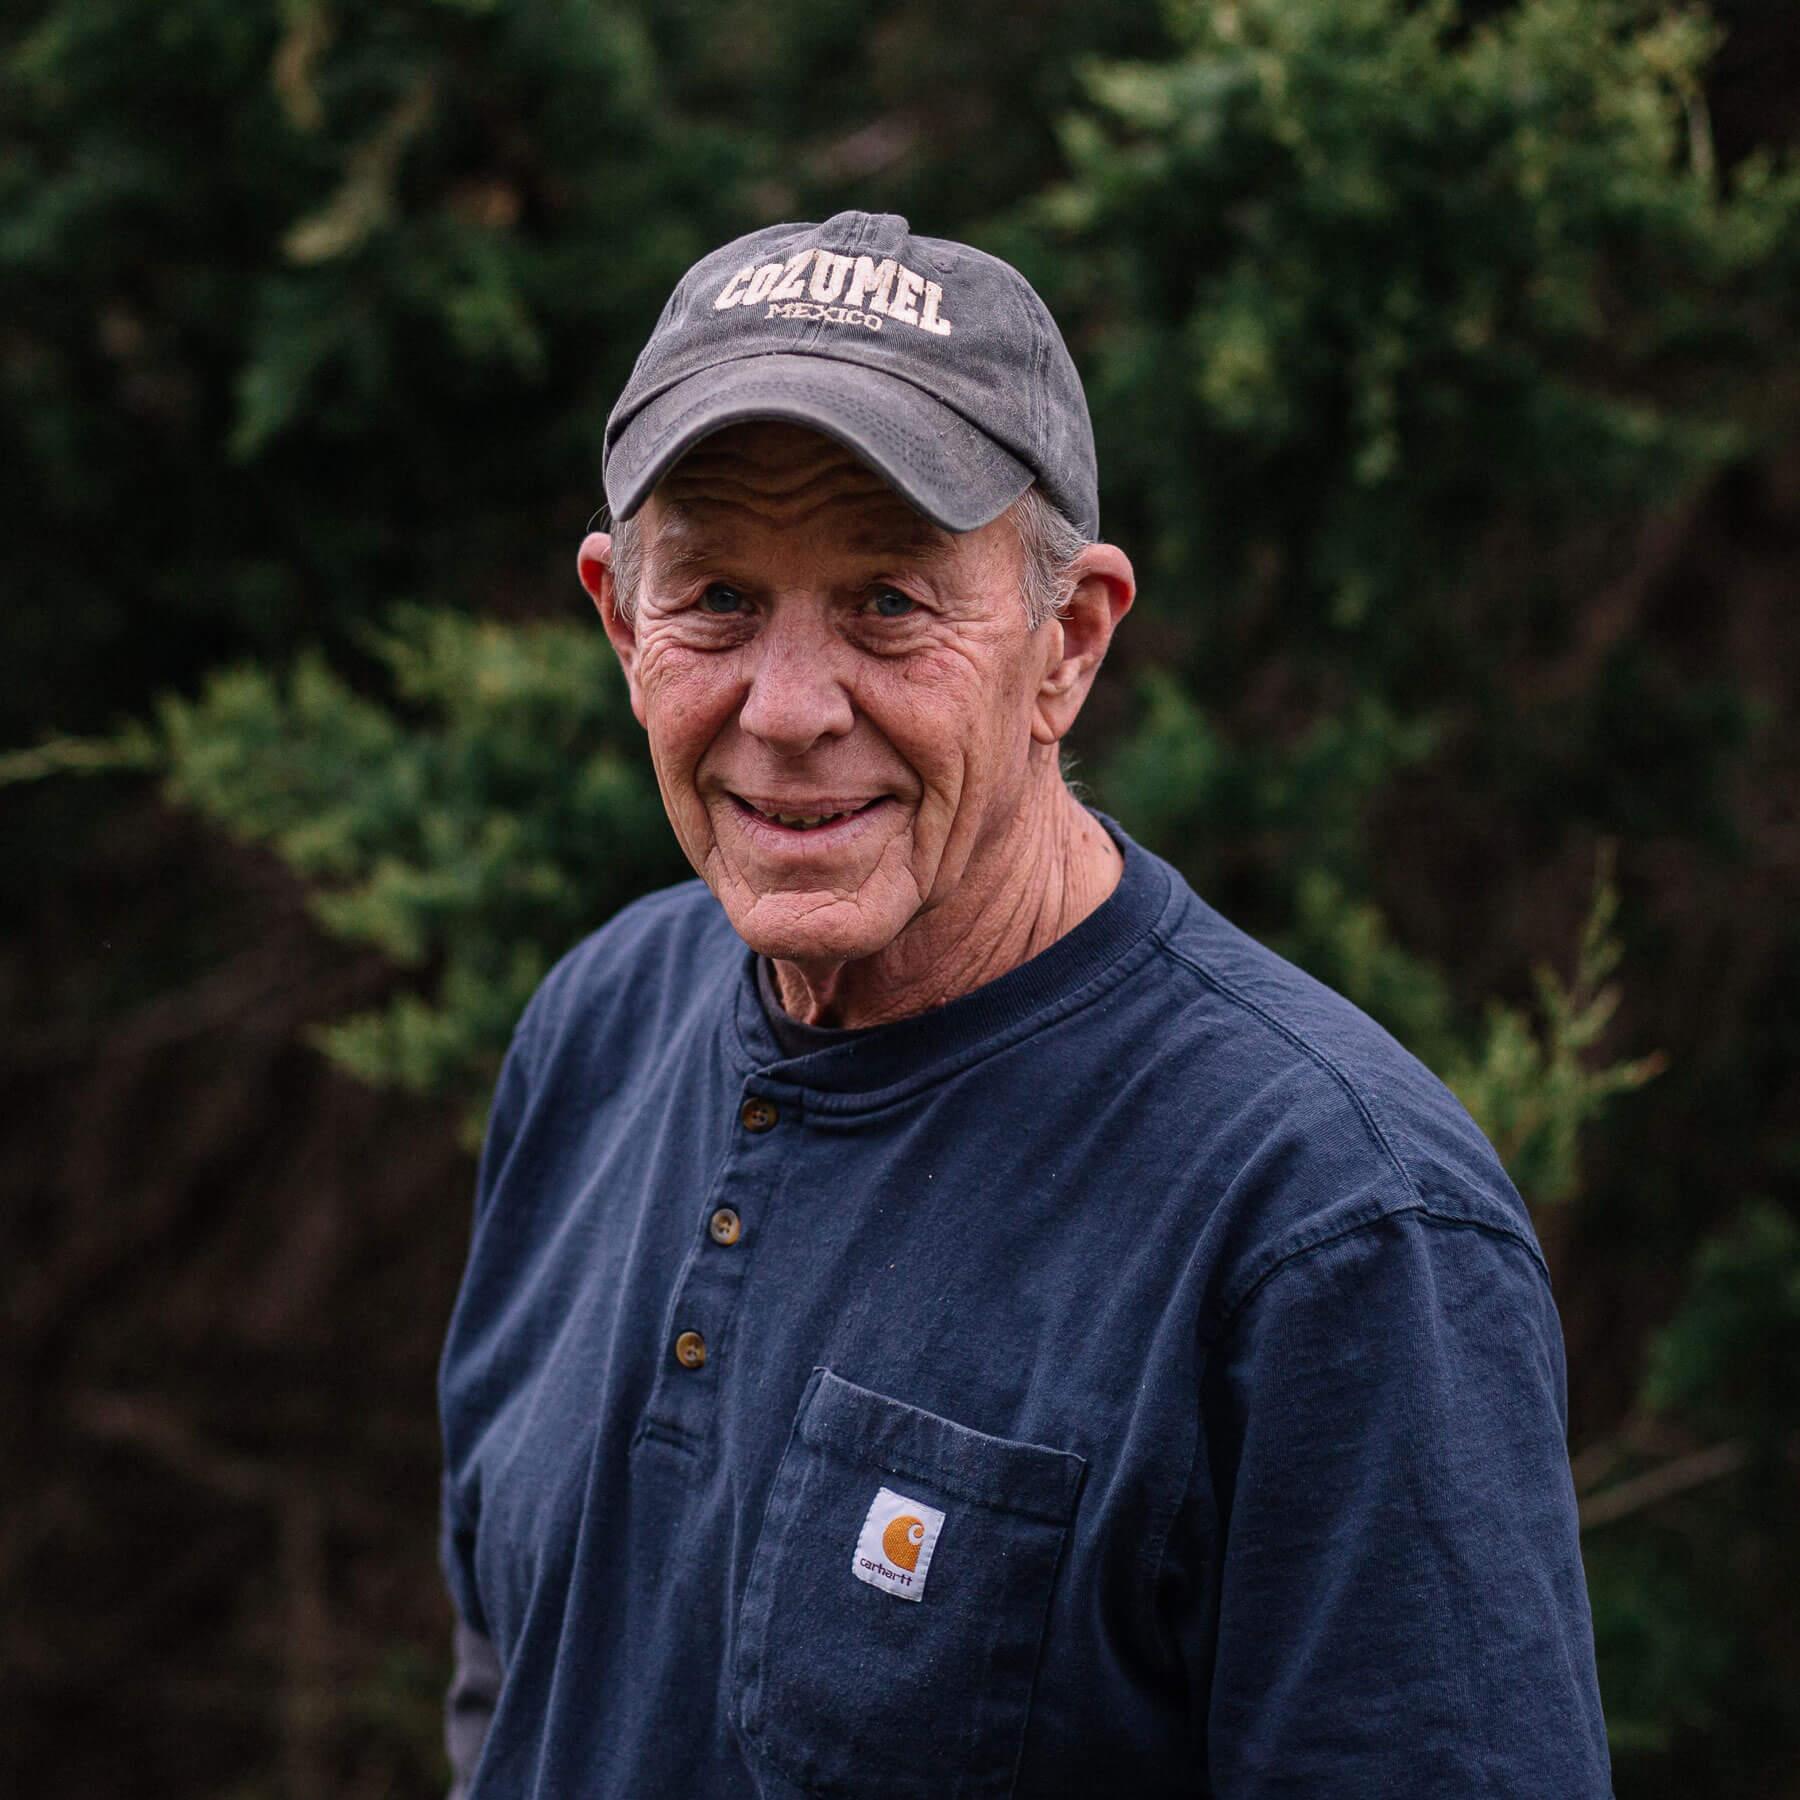 Man smiling for camera with a hat on and trees in the background